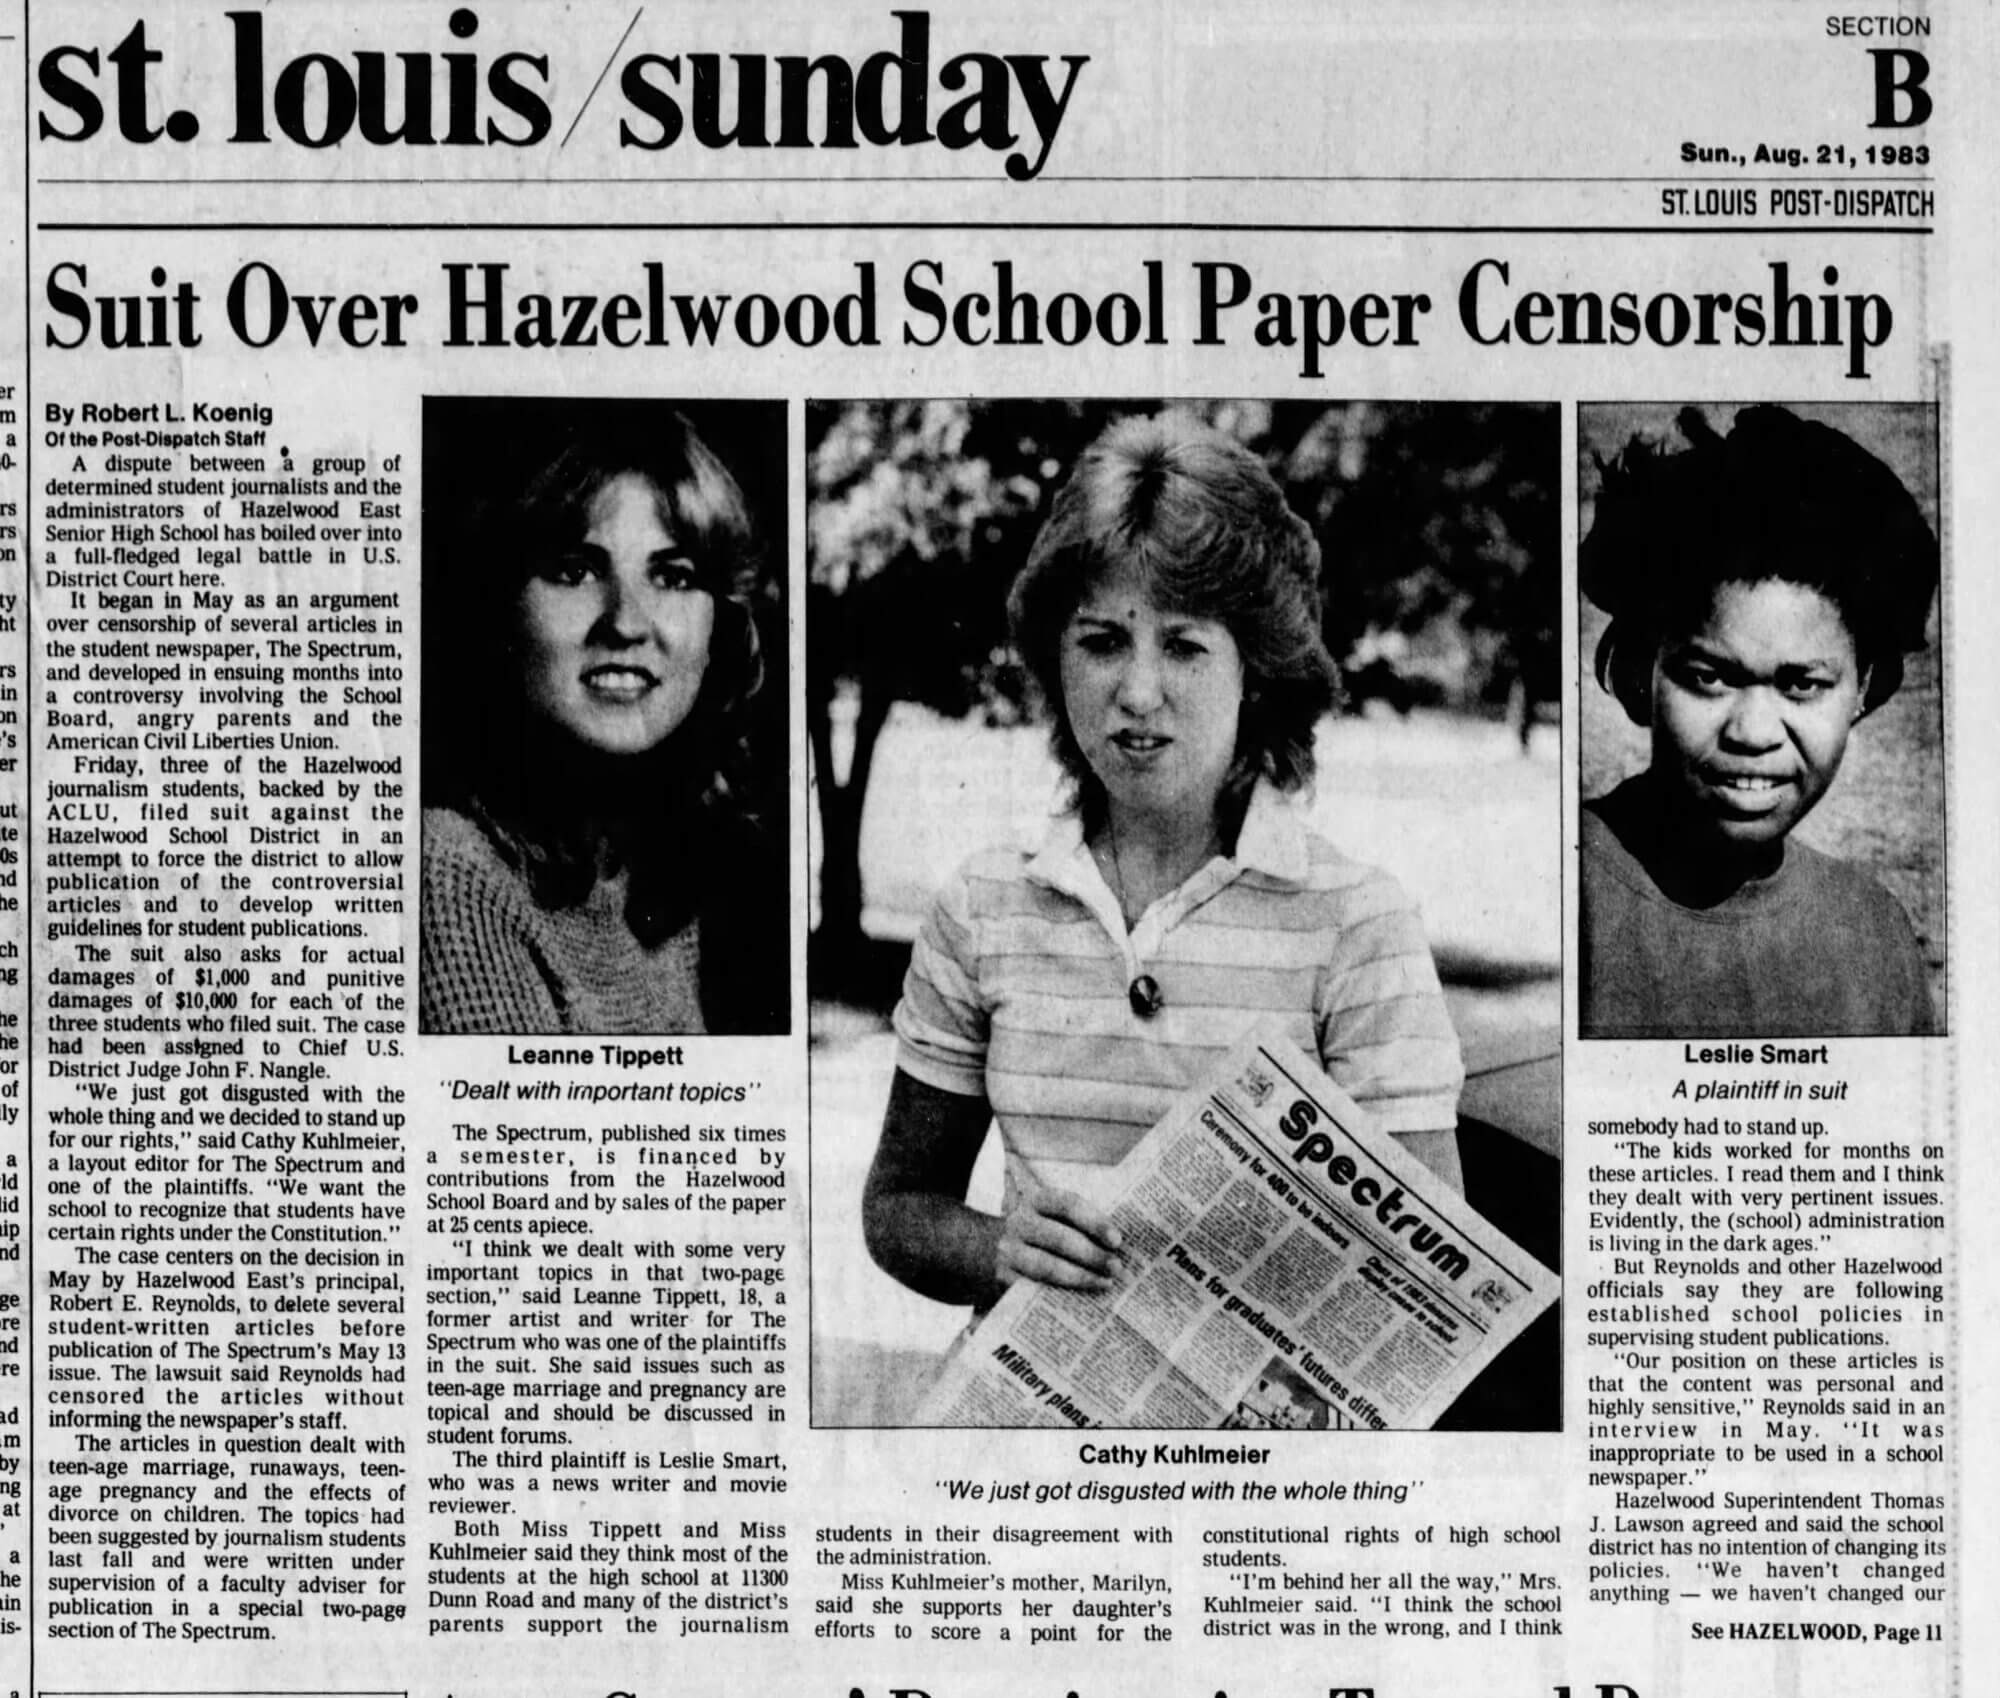 A newspaper from Saint Louis on August 21, 1983. The headline reads "suit over Hazelwood school paper censorship."